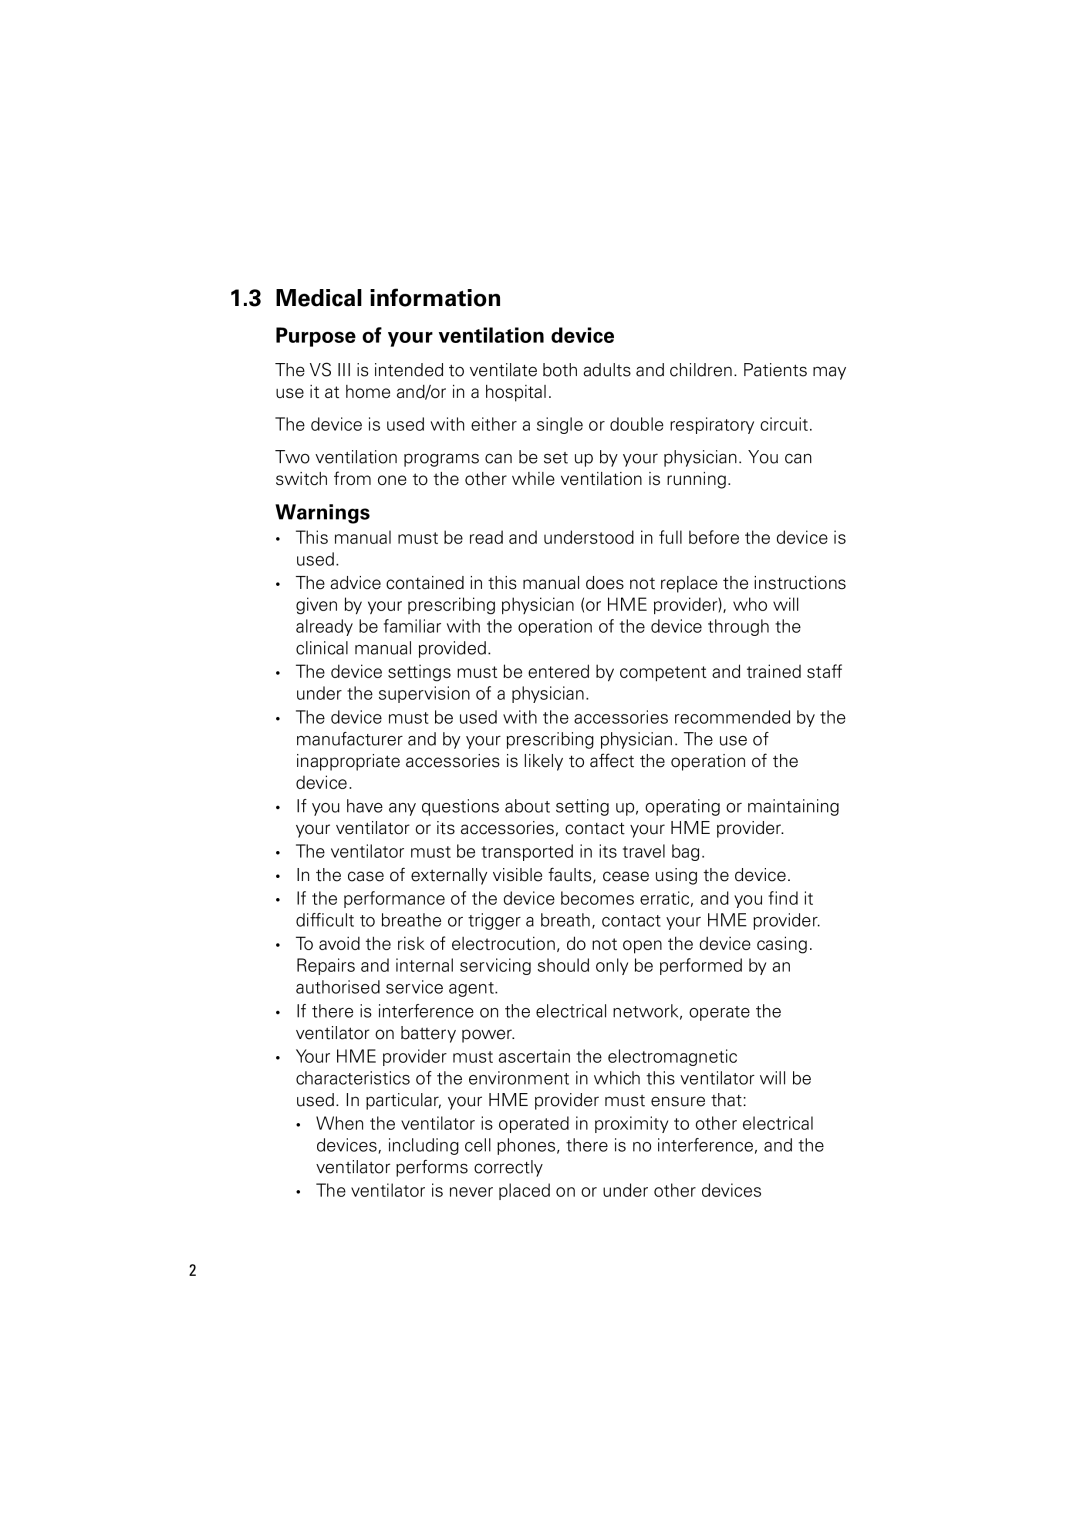 ResMed VS III user manual Medical information, Purpose of your ventilation device, Warnings 